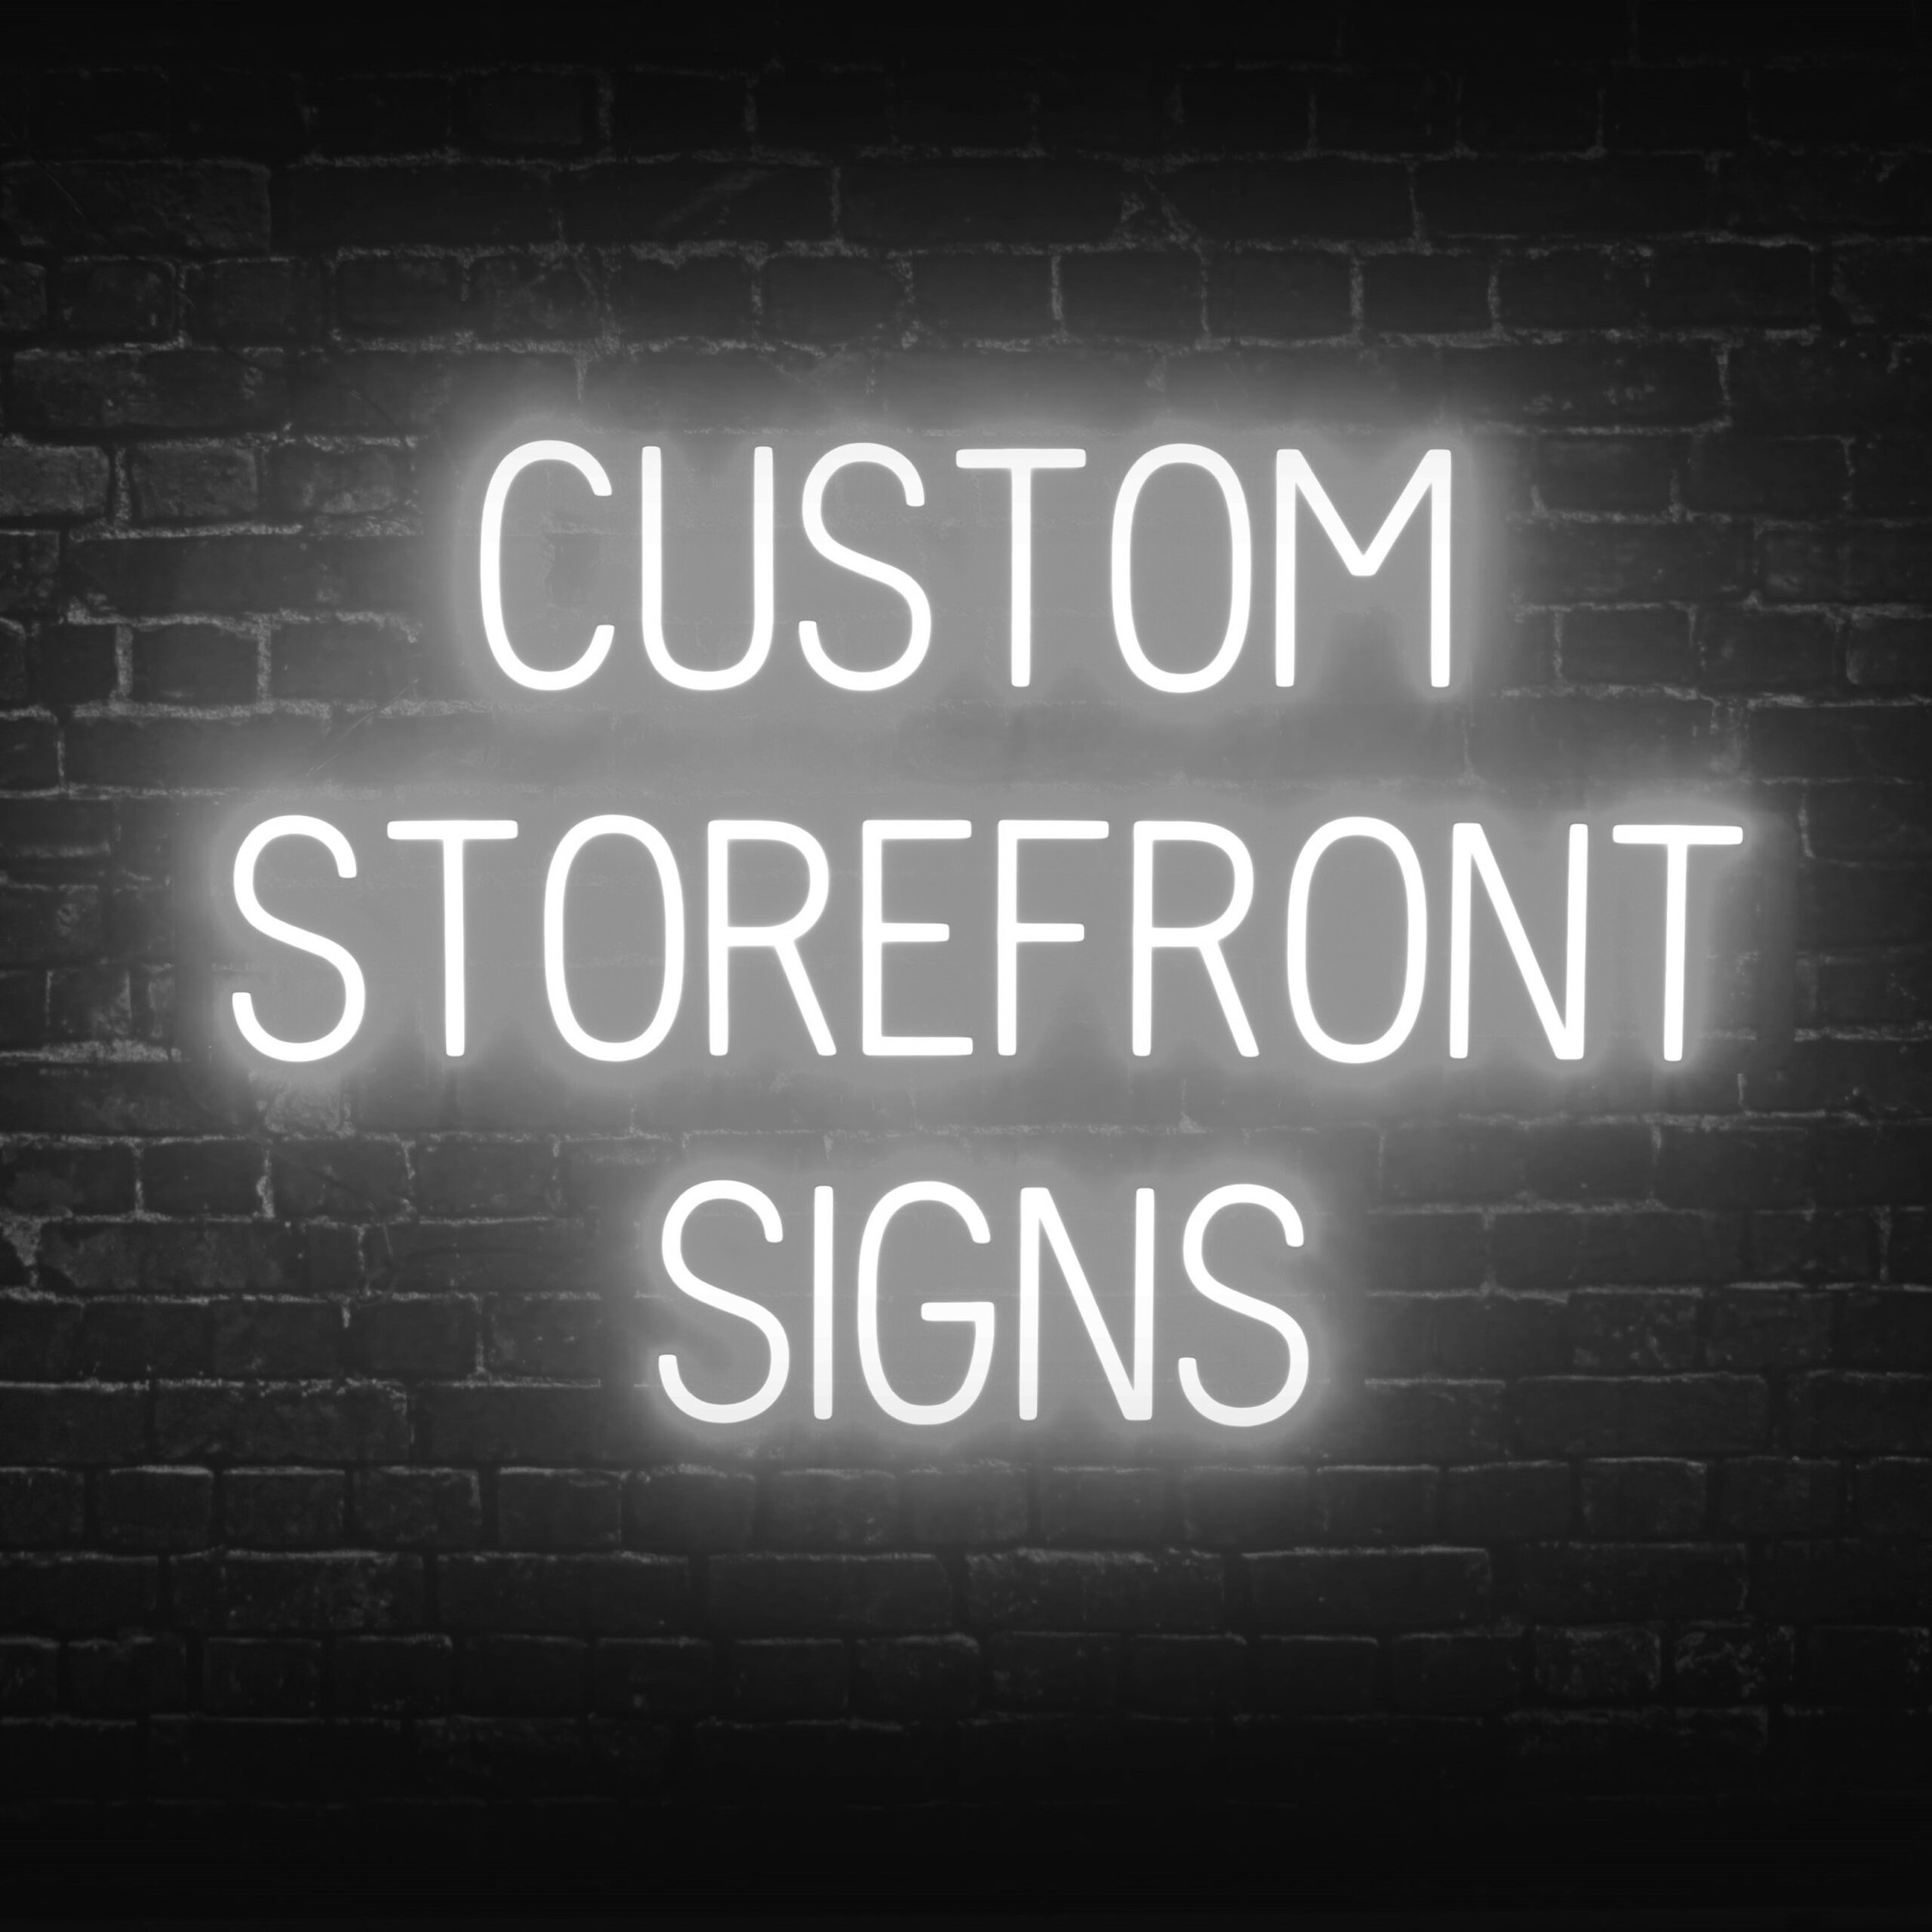 Image of SpellBrite’s Custom Storefront Signage, which can be purchased online rather than a sign store near me.